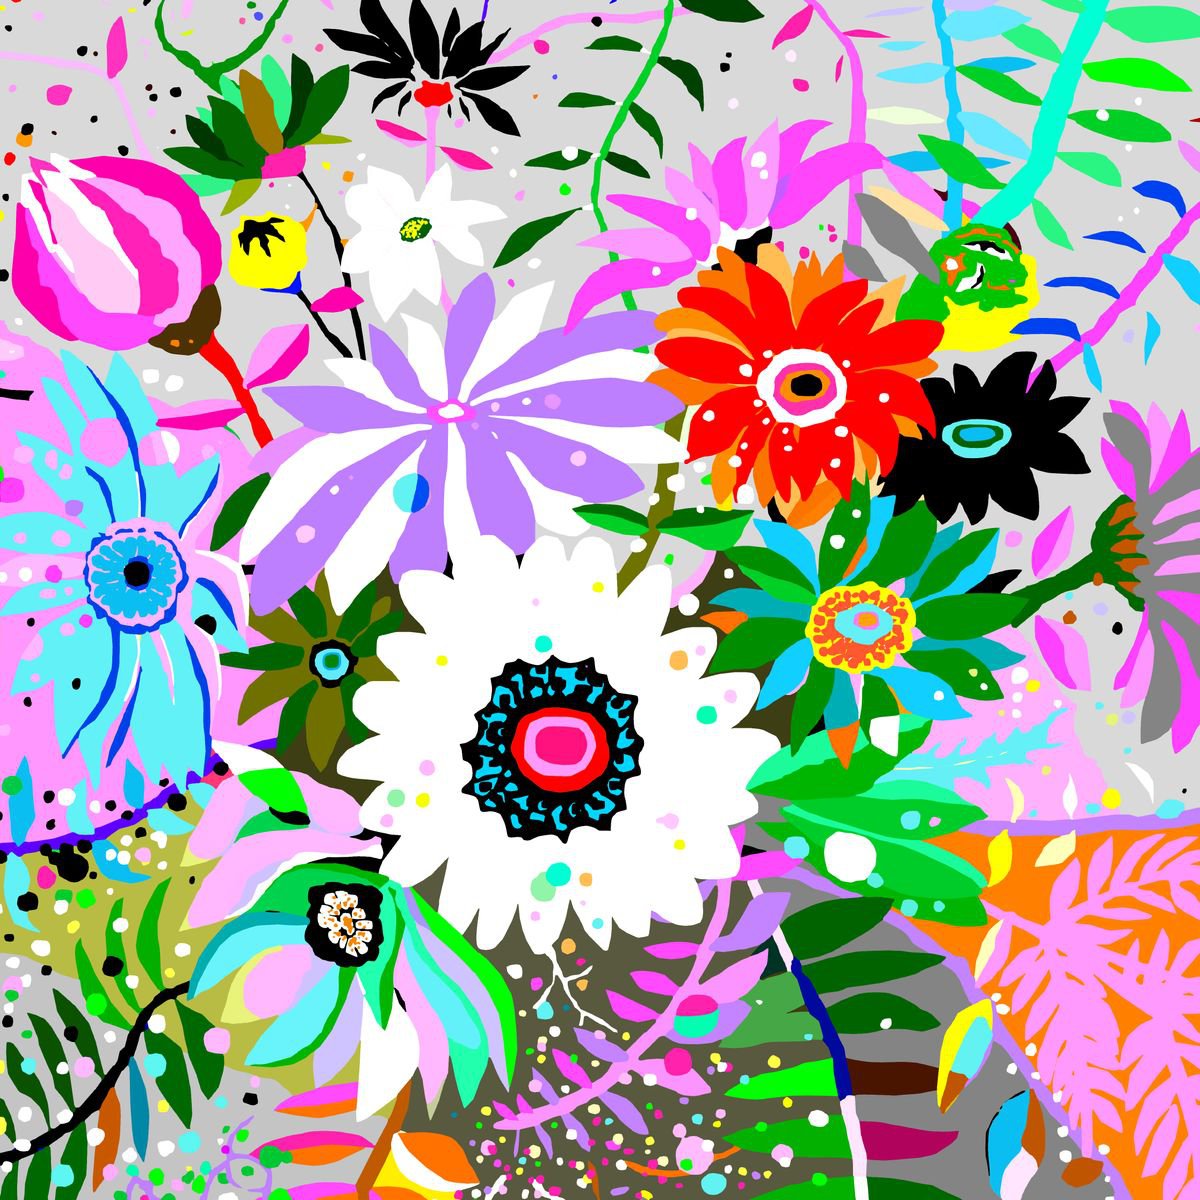 Flowers for Mary (Flores para Maria) (pop art, flowers) by Alejos - Pop Art landscapes